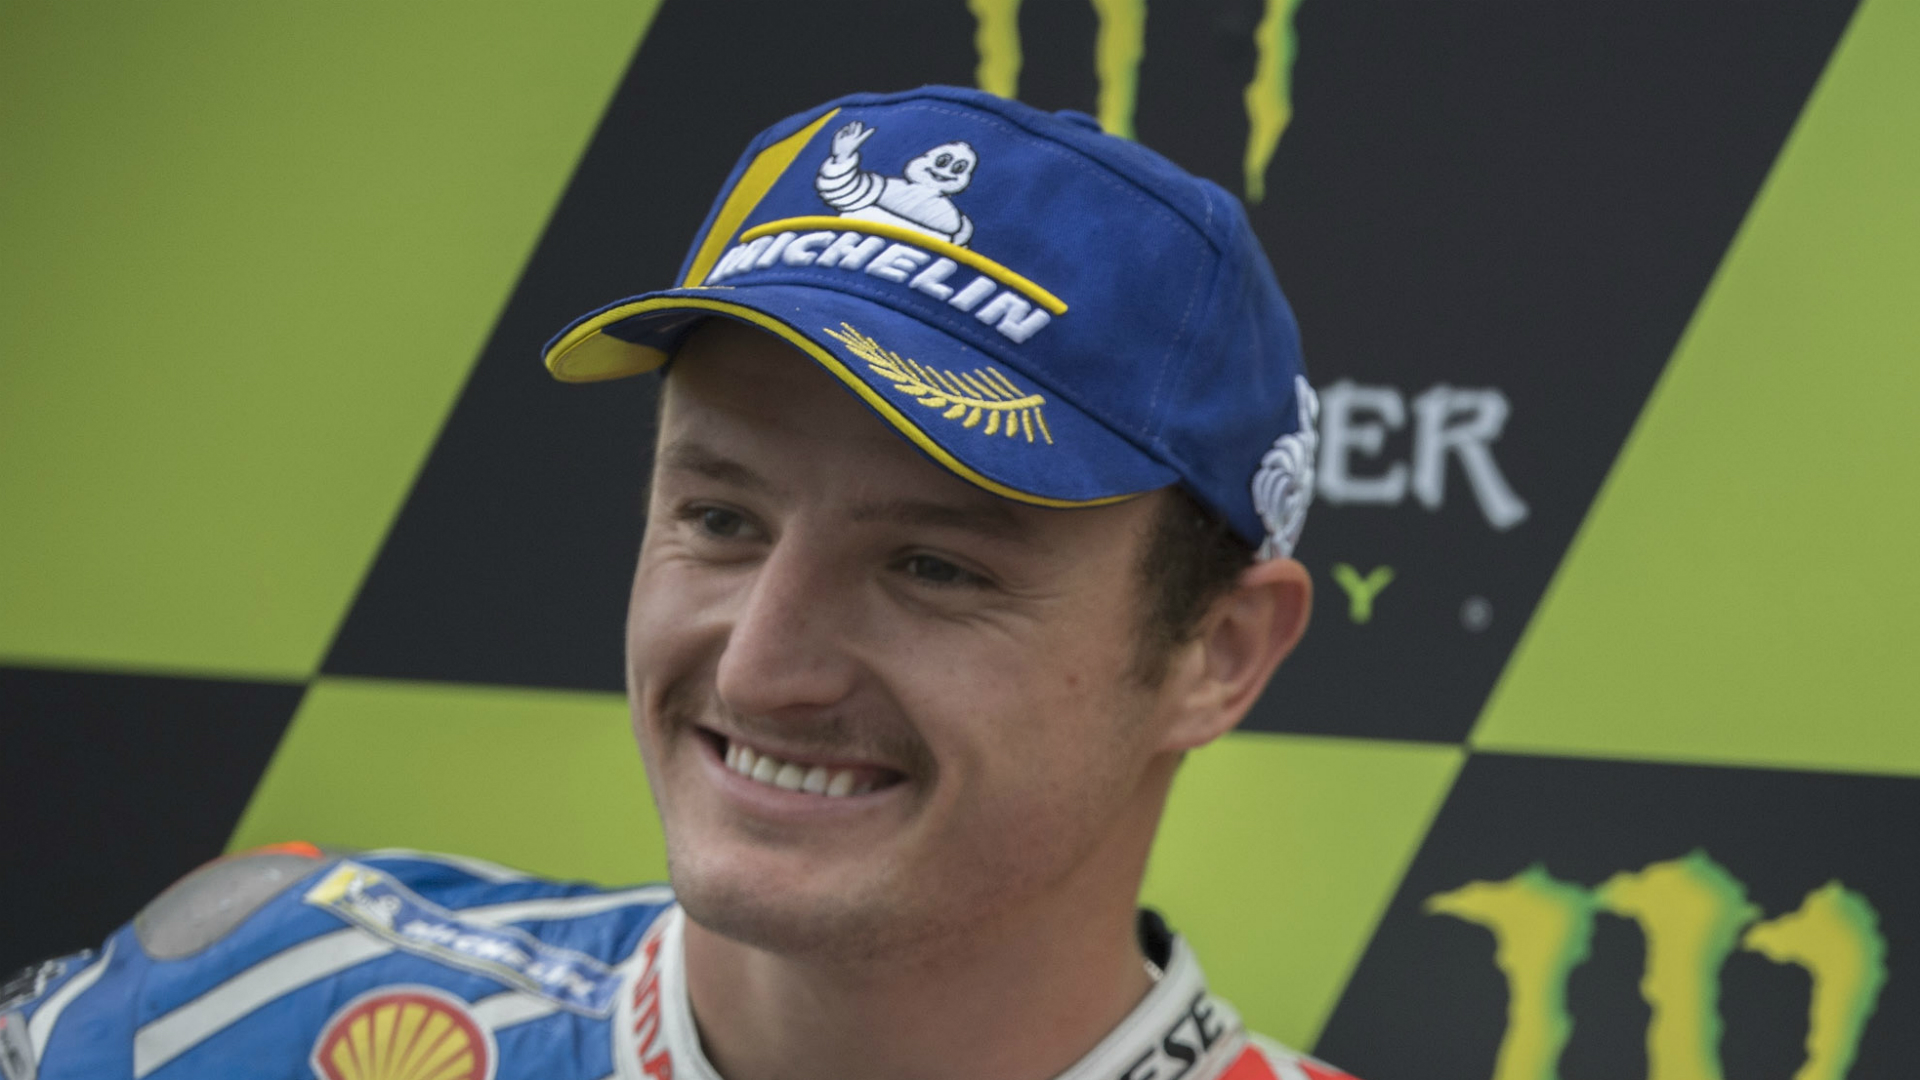 Jorge Lorenzo had been linked with a move to Pramac Racing but the team have instead given a new contract to Australian Jack Miller.